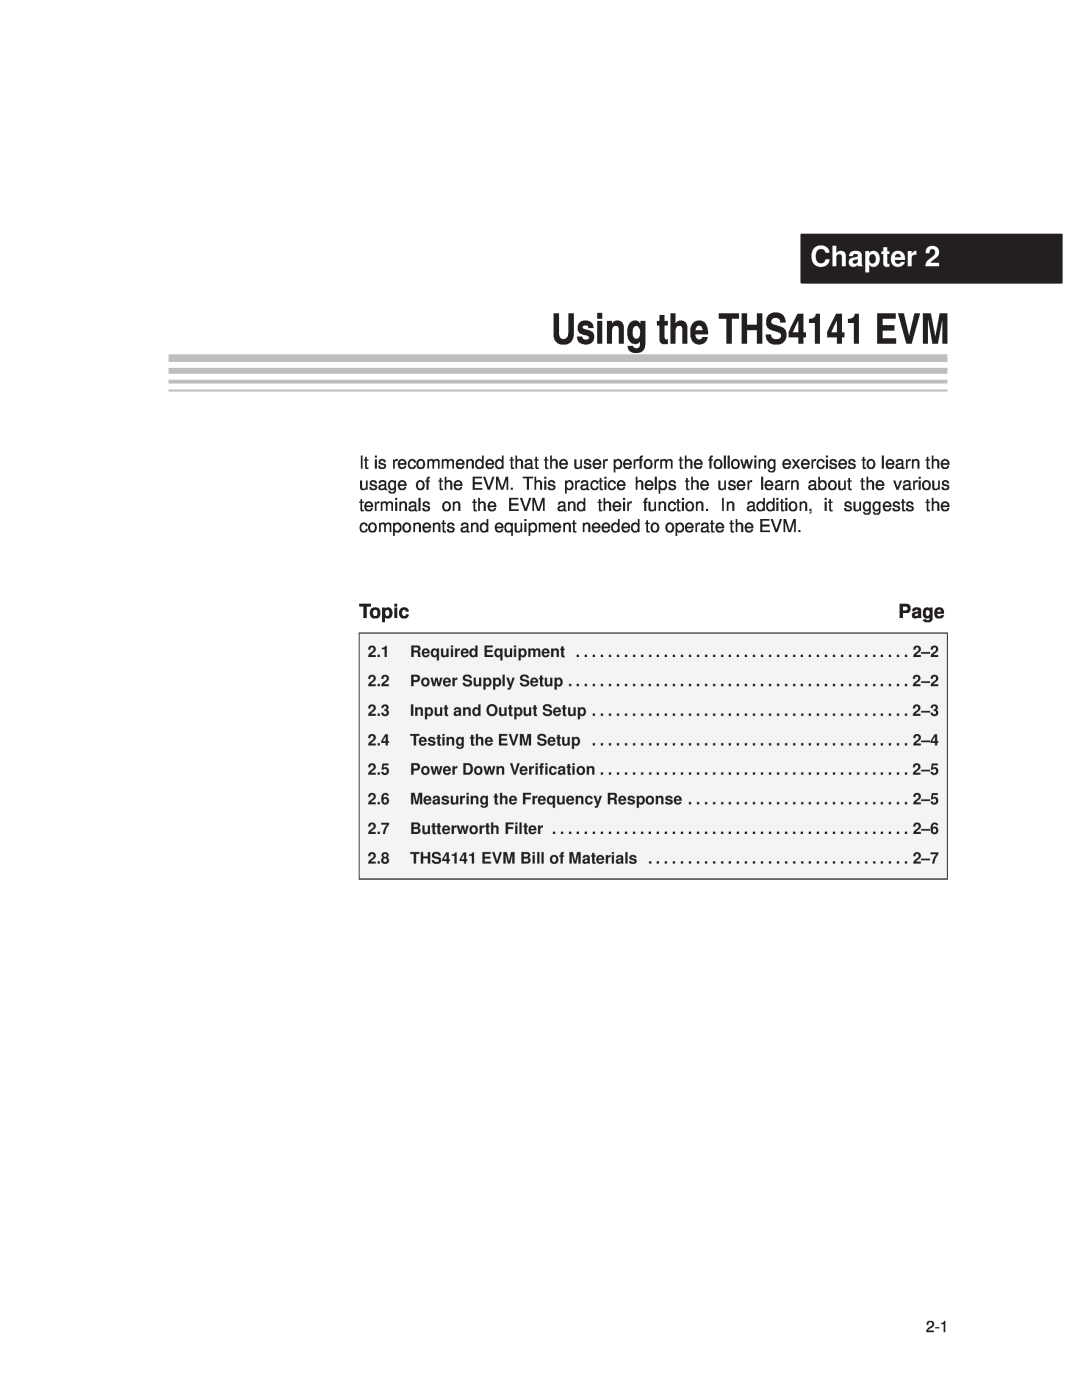 Texas Instruments manual Using the THS4141 EVM, Chapter, Page, Topic 